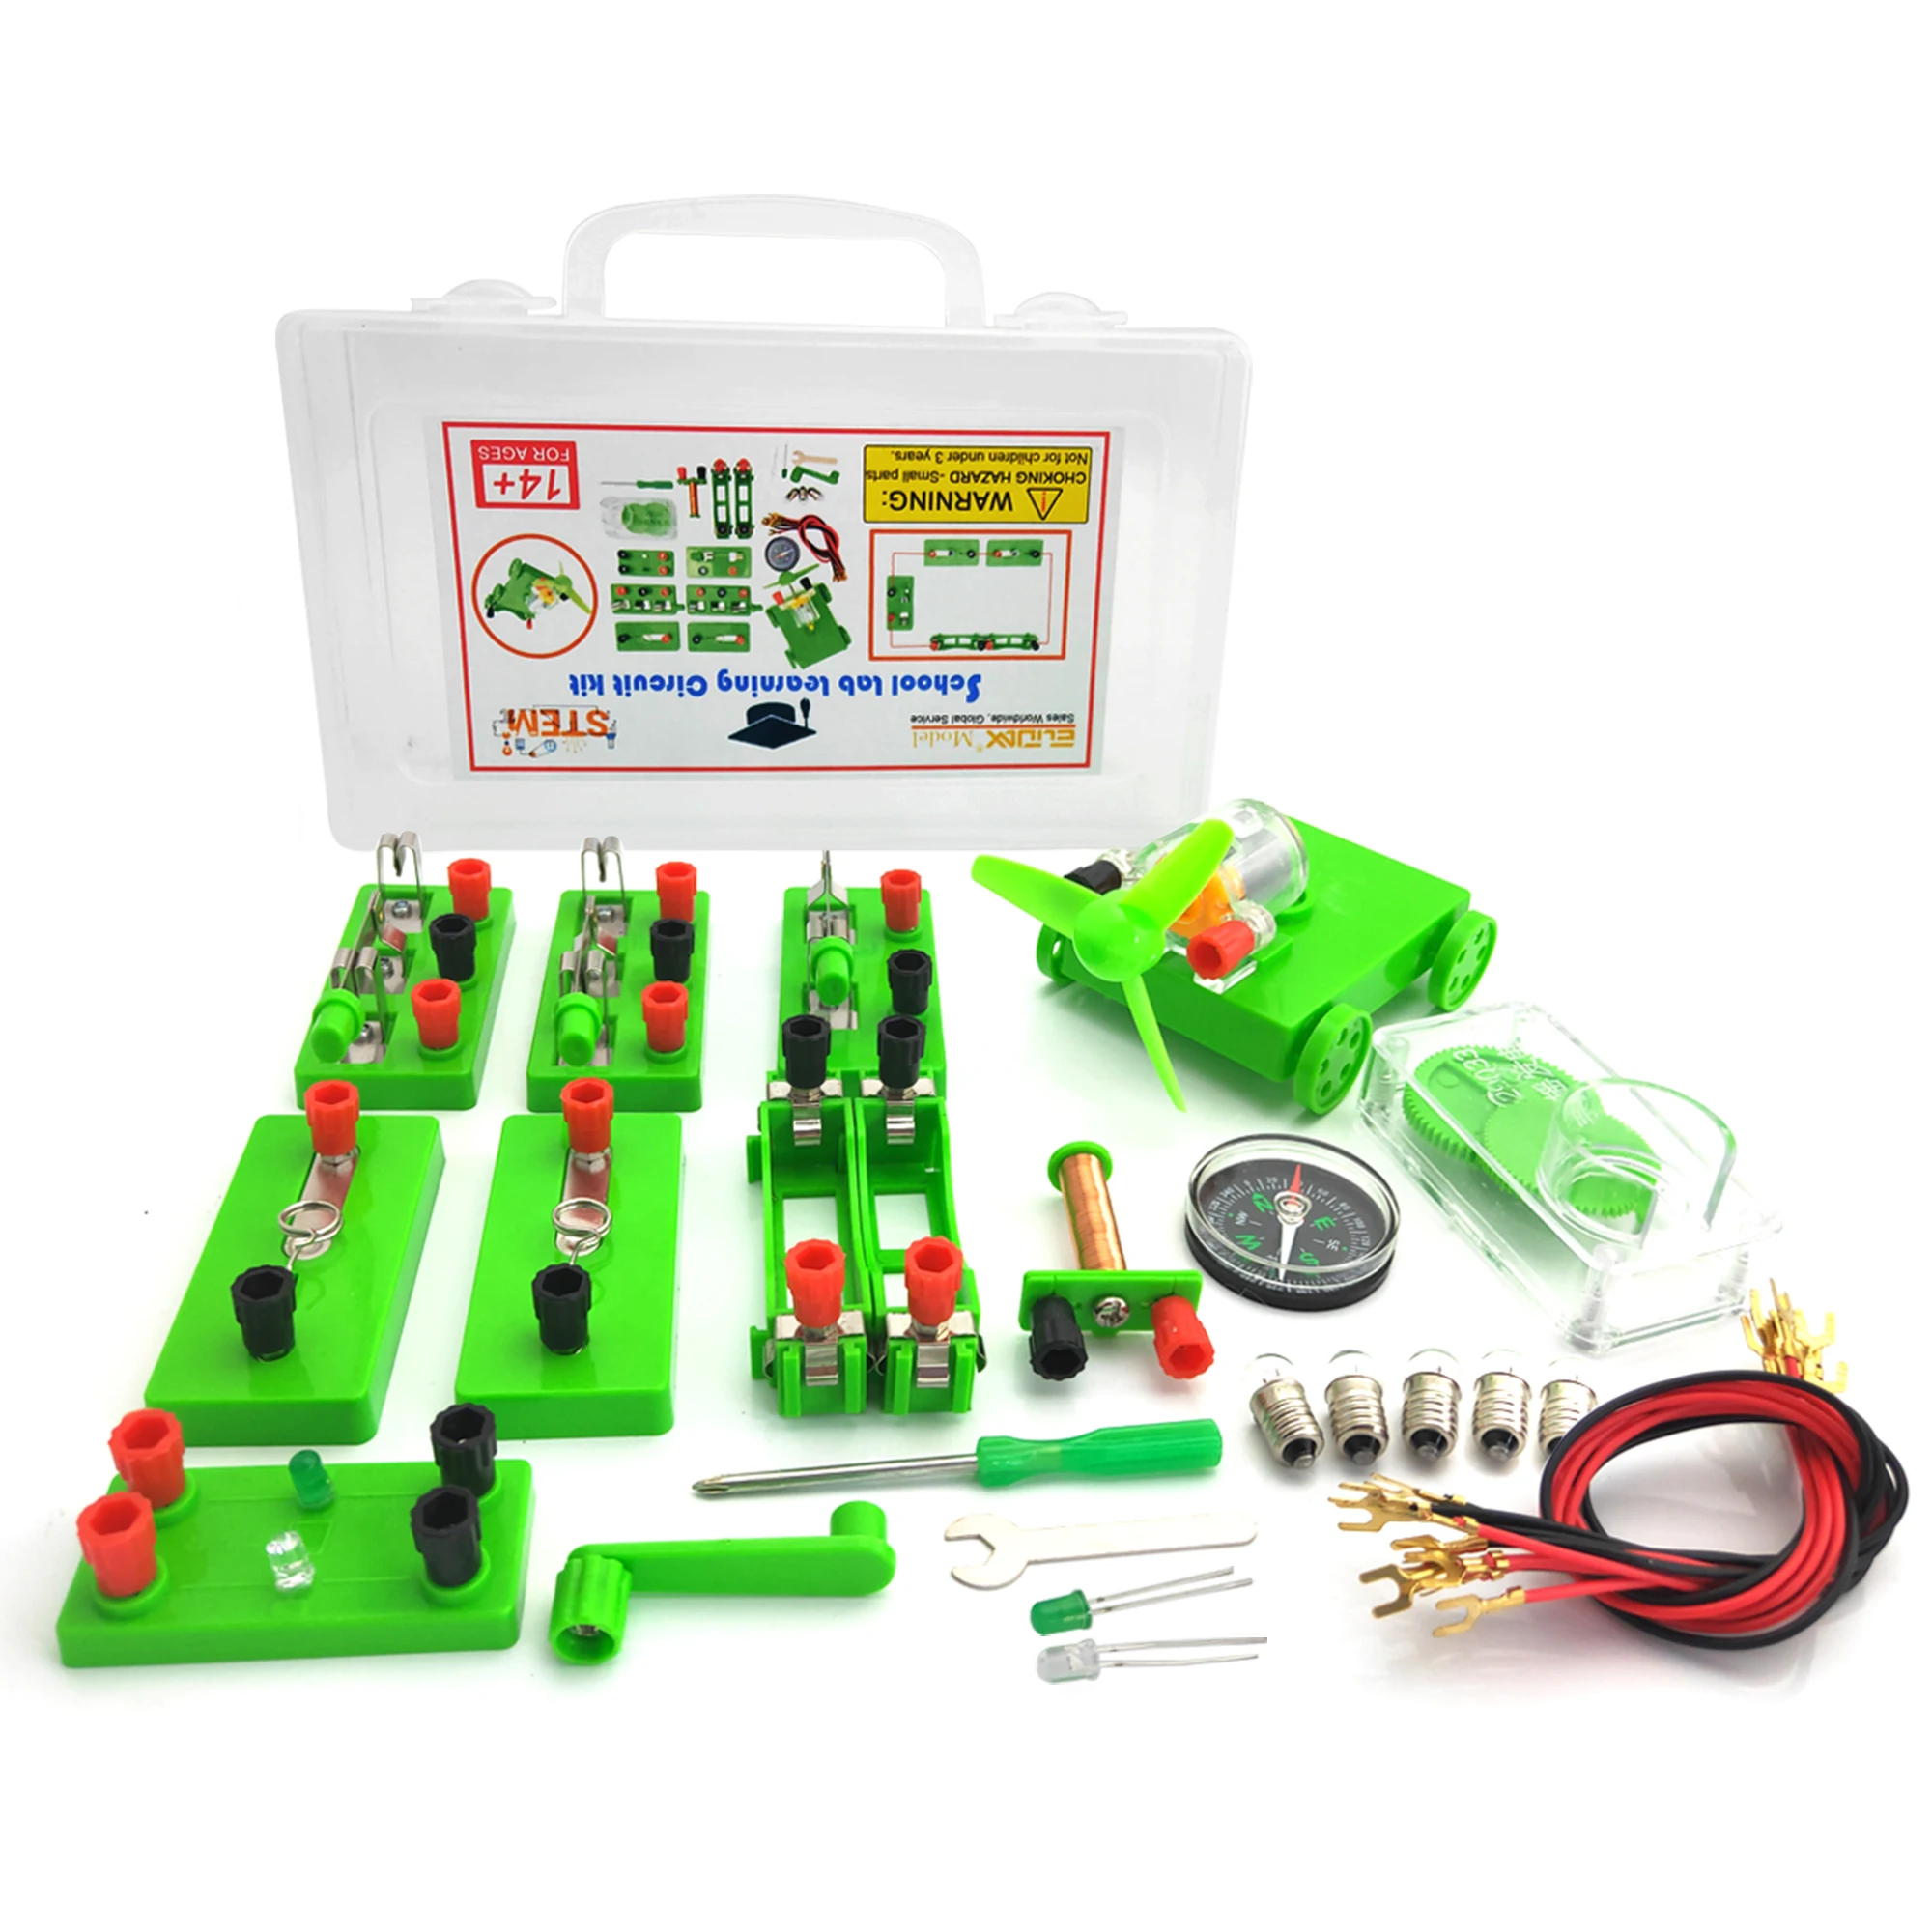 Fun Kids Electric Circuit Kit Learning for Children School Student Science Toy S 